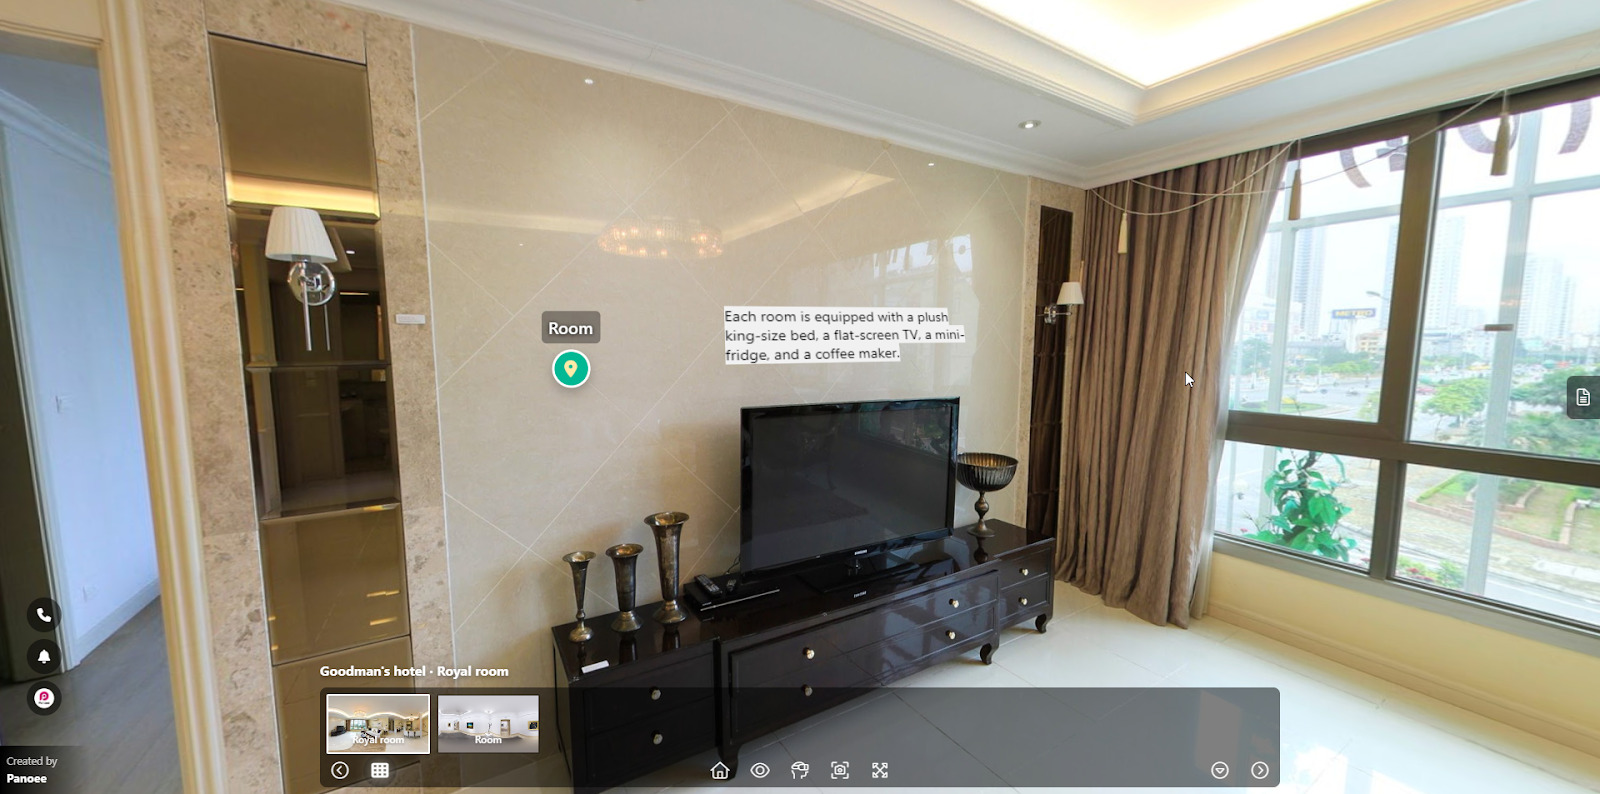 Set up the initial view of your virtual tour